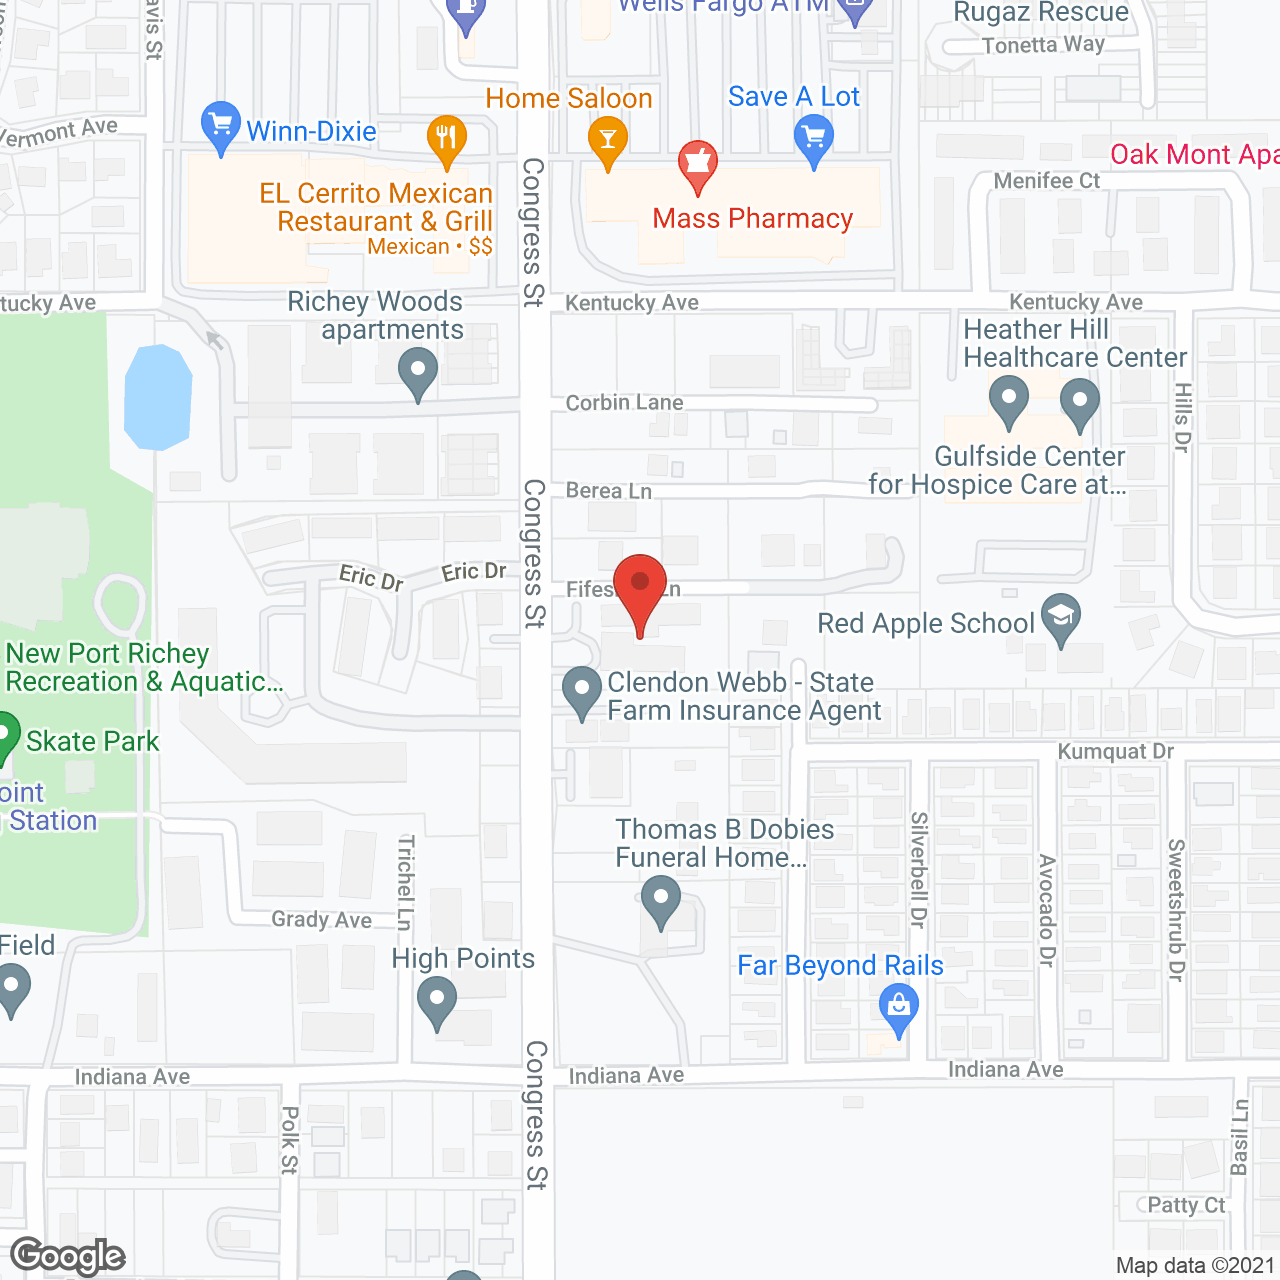 Angels Senior Living at New Port Richey in google map